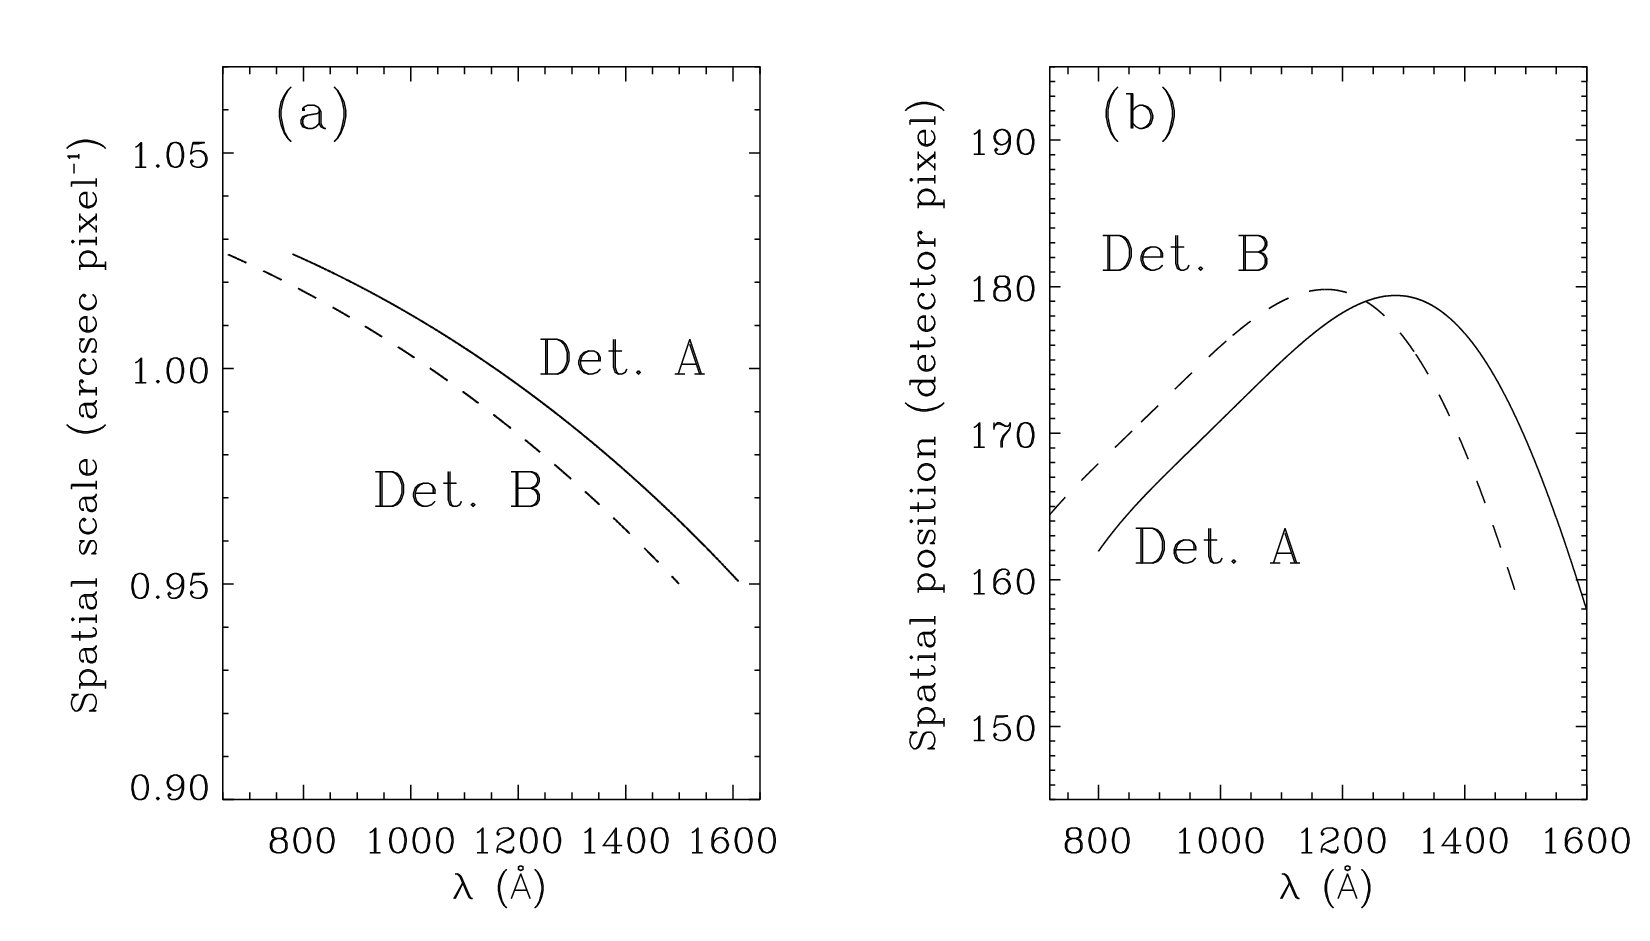 Slit image scale and spatial displacement on the detector planes as a 
function of wavelength.